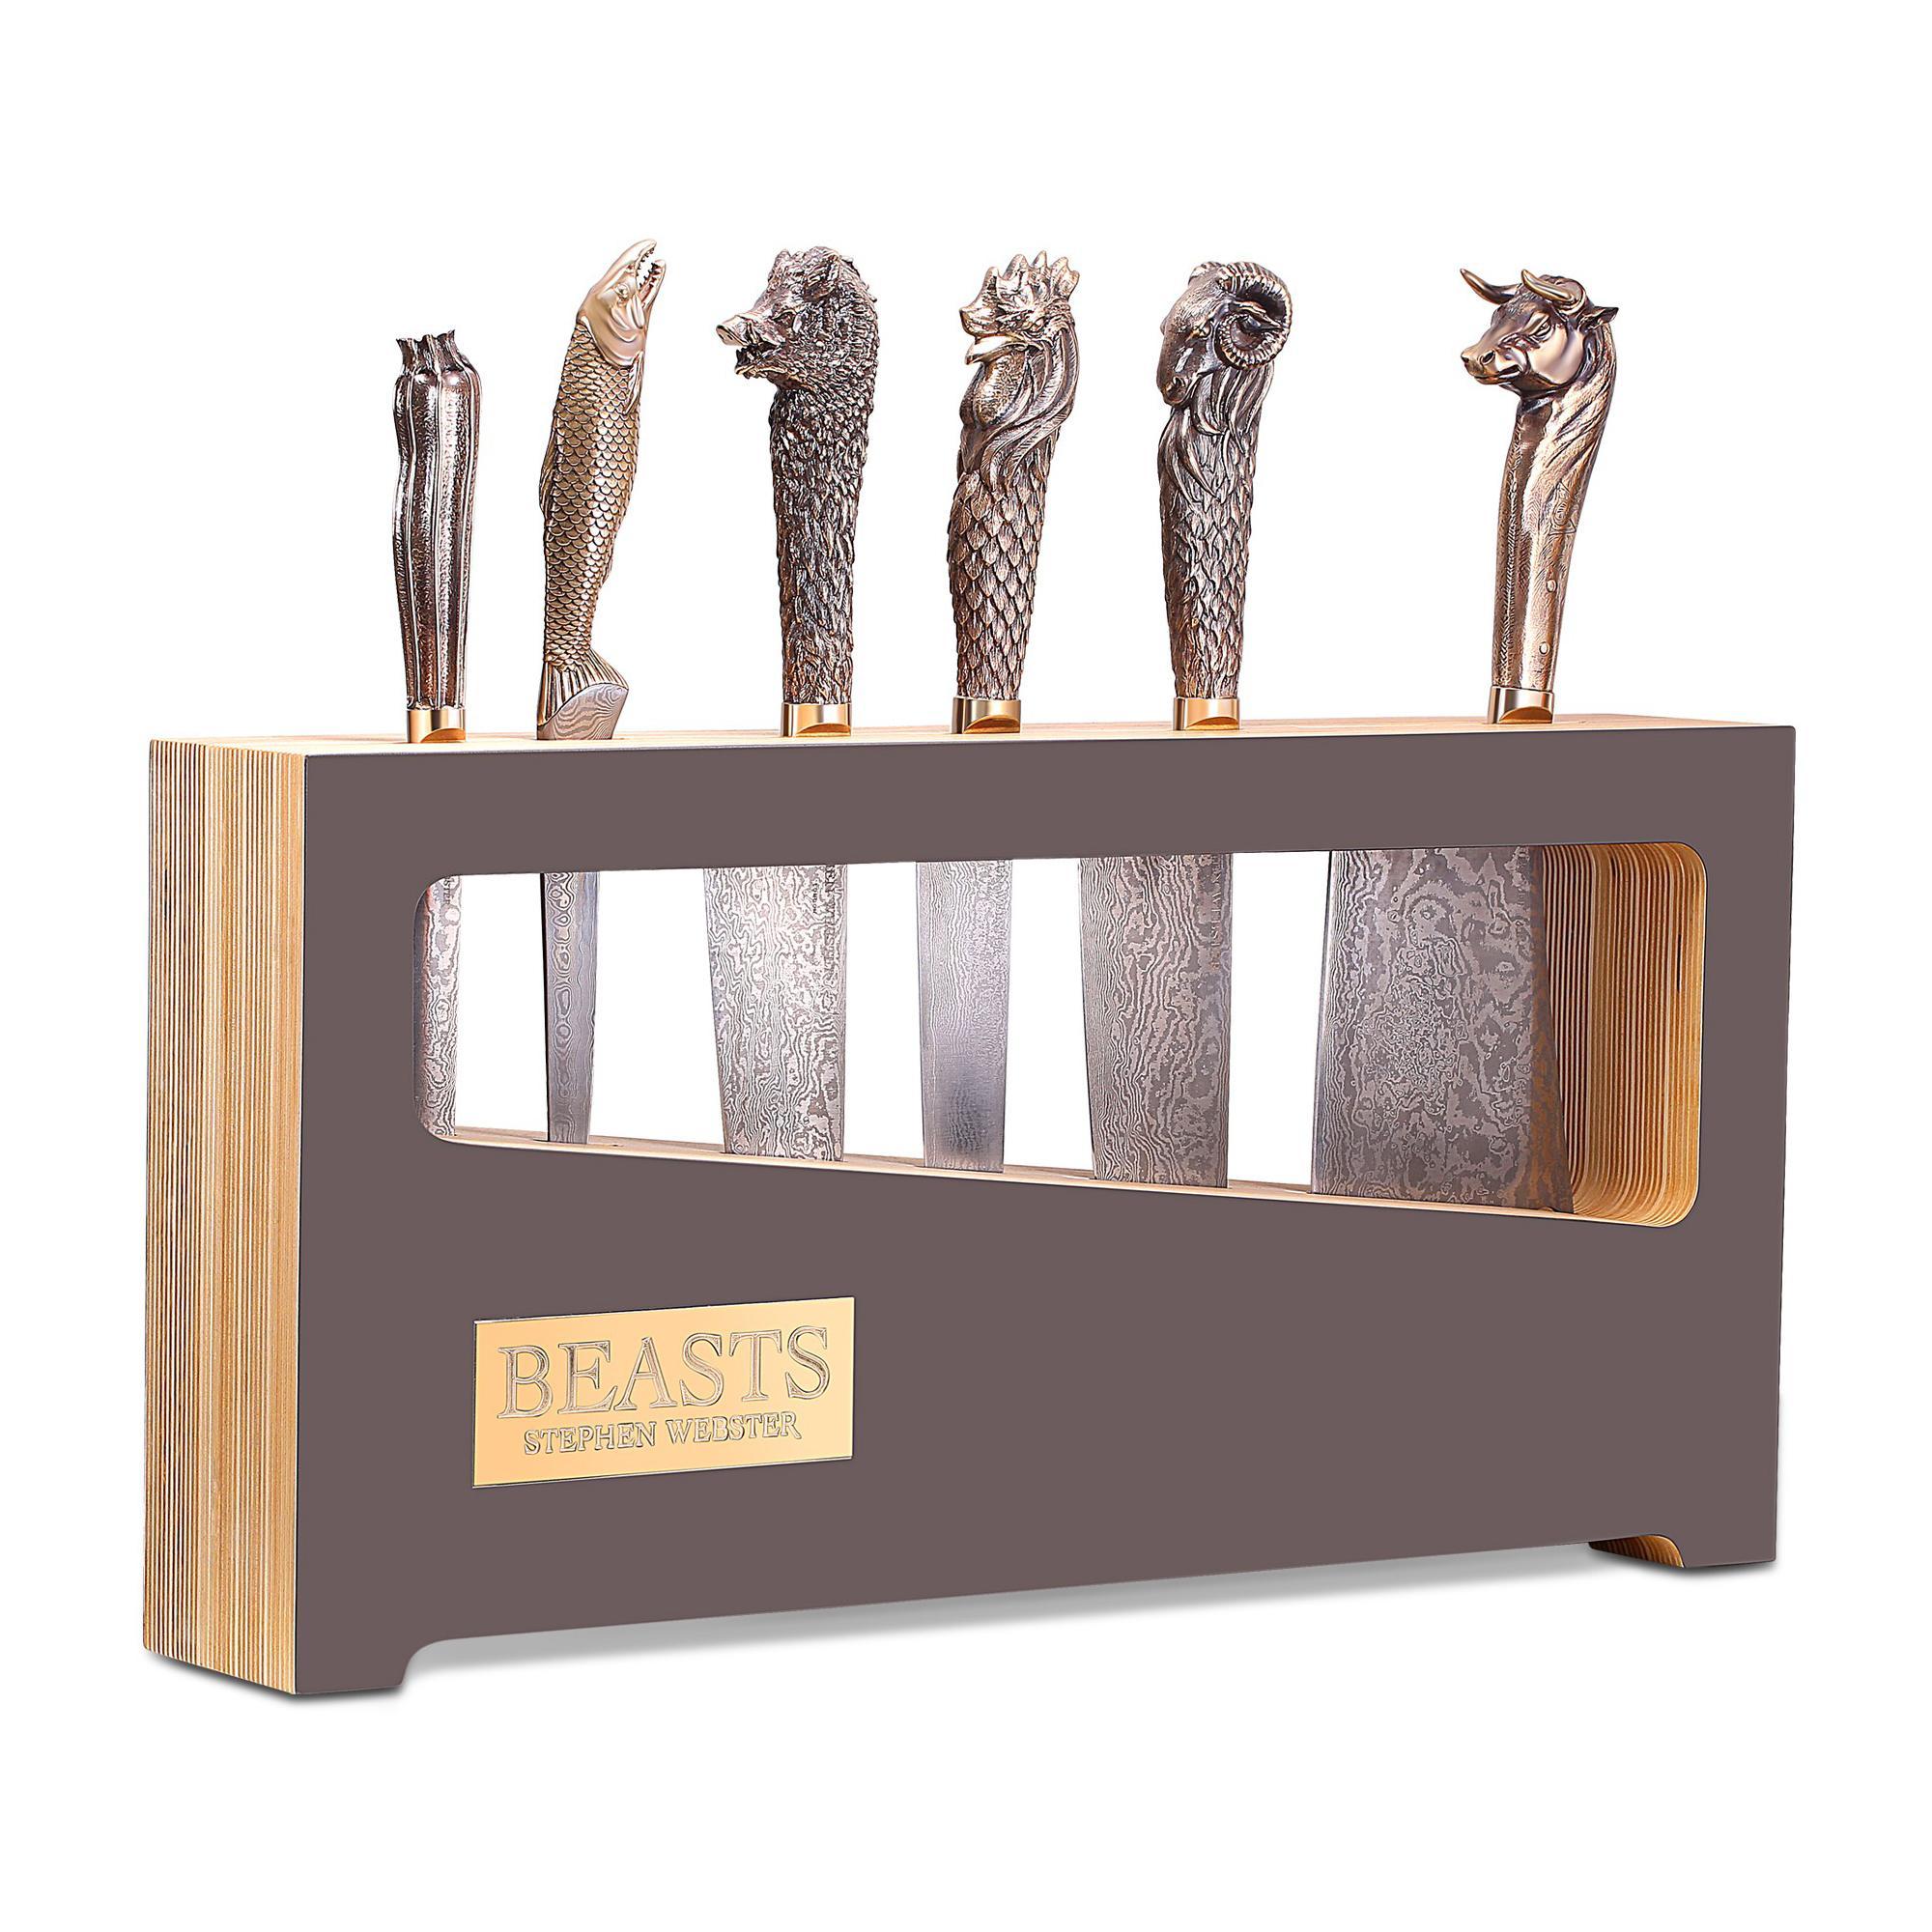 Beasts chef's knives, all with folded steel blades and bronze handles featuring a boar, a bull, a ram, a rooster, a sockeye salmon and a Courgette with knife block.

Please enquire for your exclusive price if your delivery country is outside of the